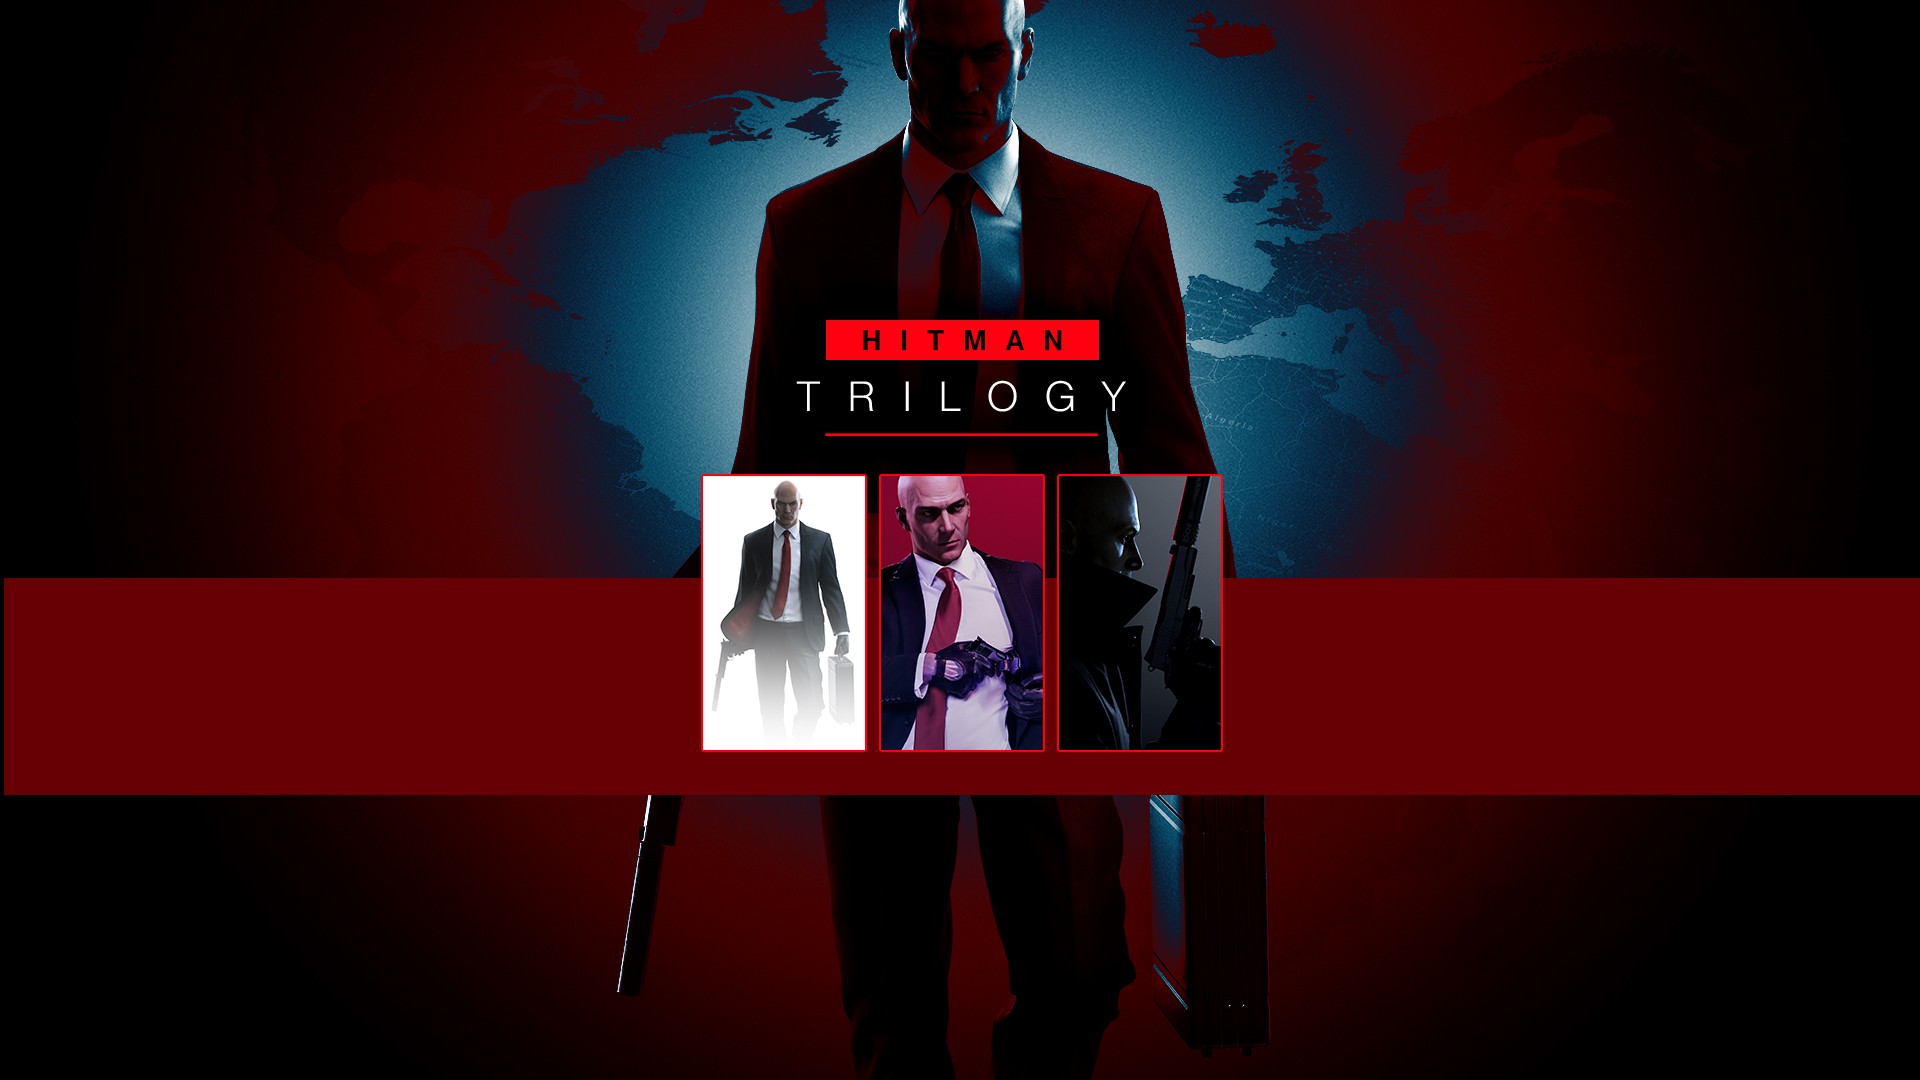 Hitman Trilogy Brings the World of Assassination to Xbox Game Pass